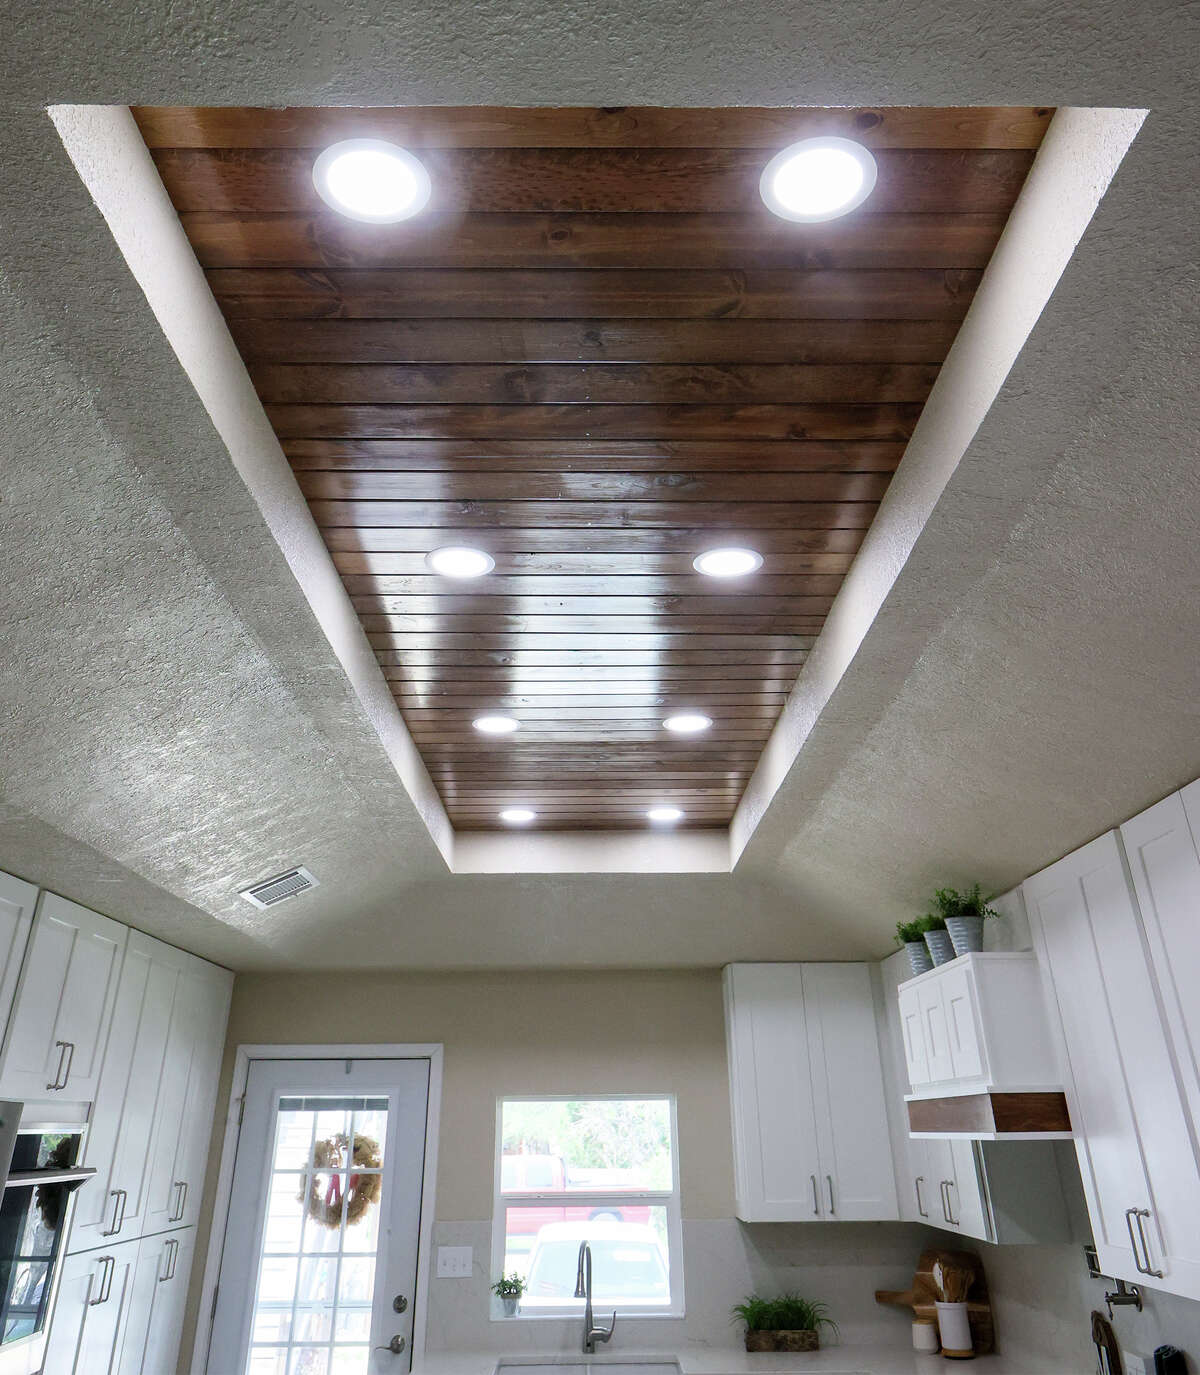 The brightness level of the ceiling LED lighting is adjustable. It's currently set to the highest intensity.